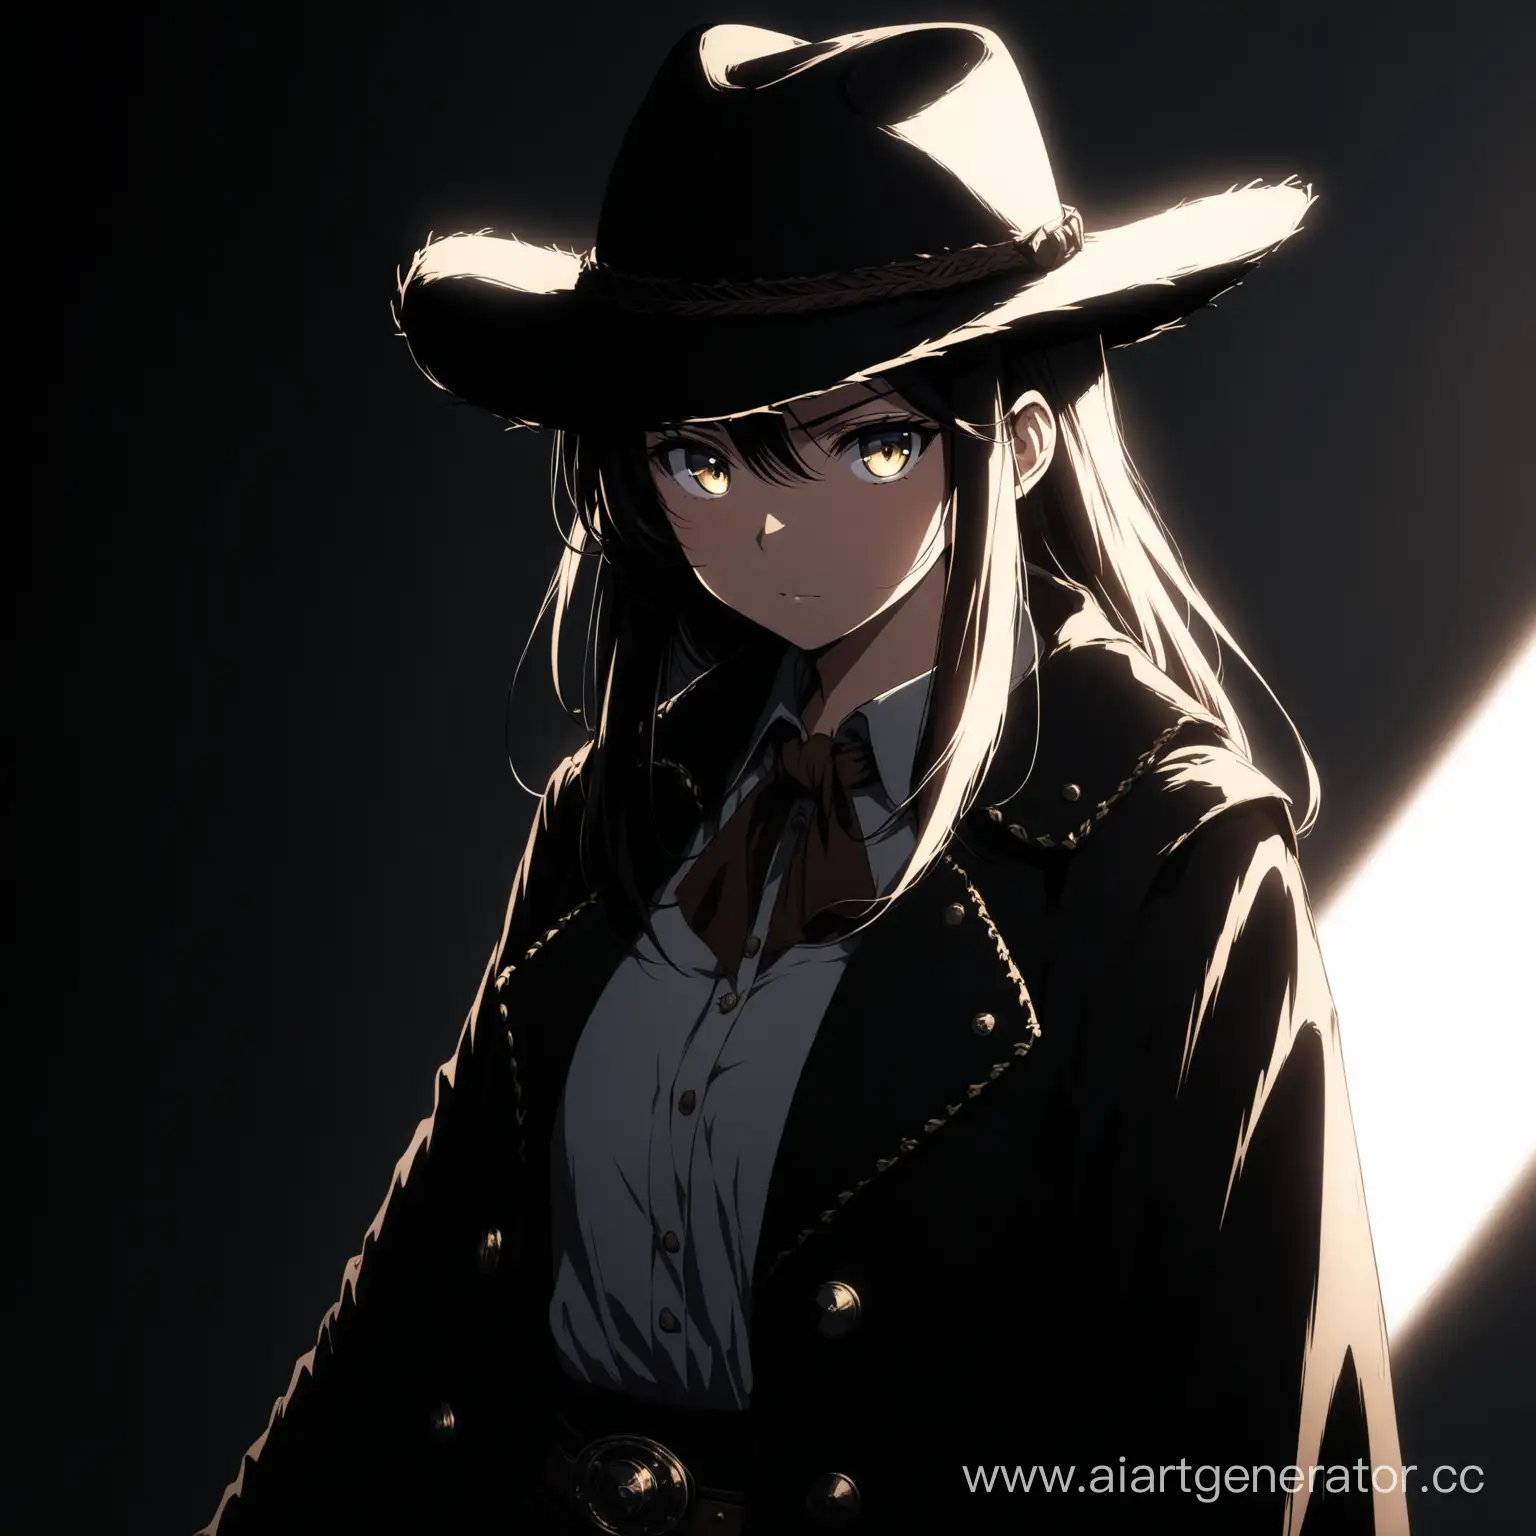 Anime-Cowgirl-with-Intricate-Eyes-and-Western-Attire-Amidst-Detailed-Lighting-and-Shadows